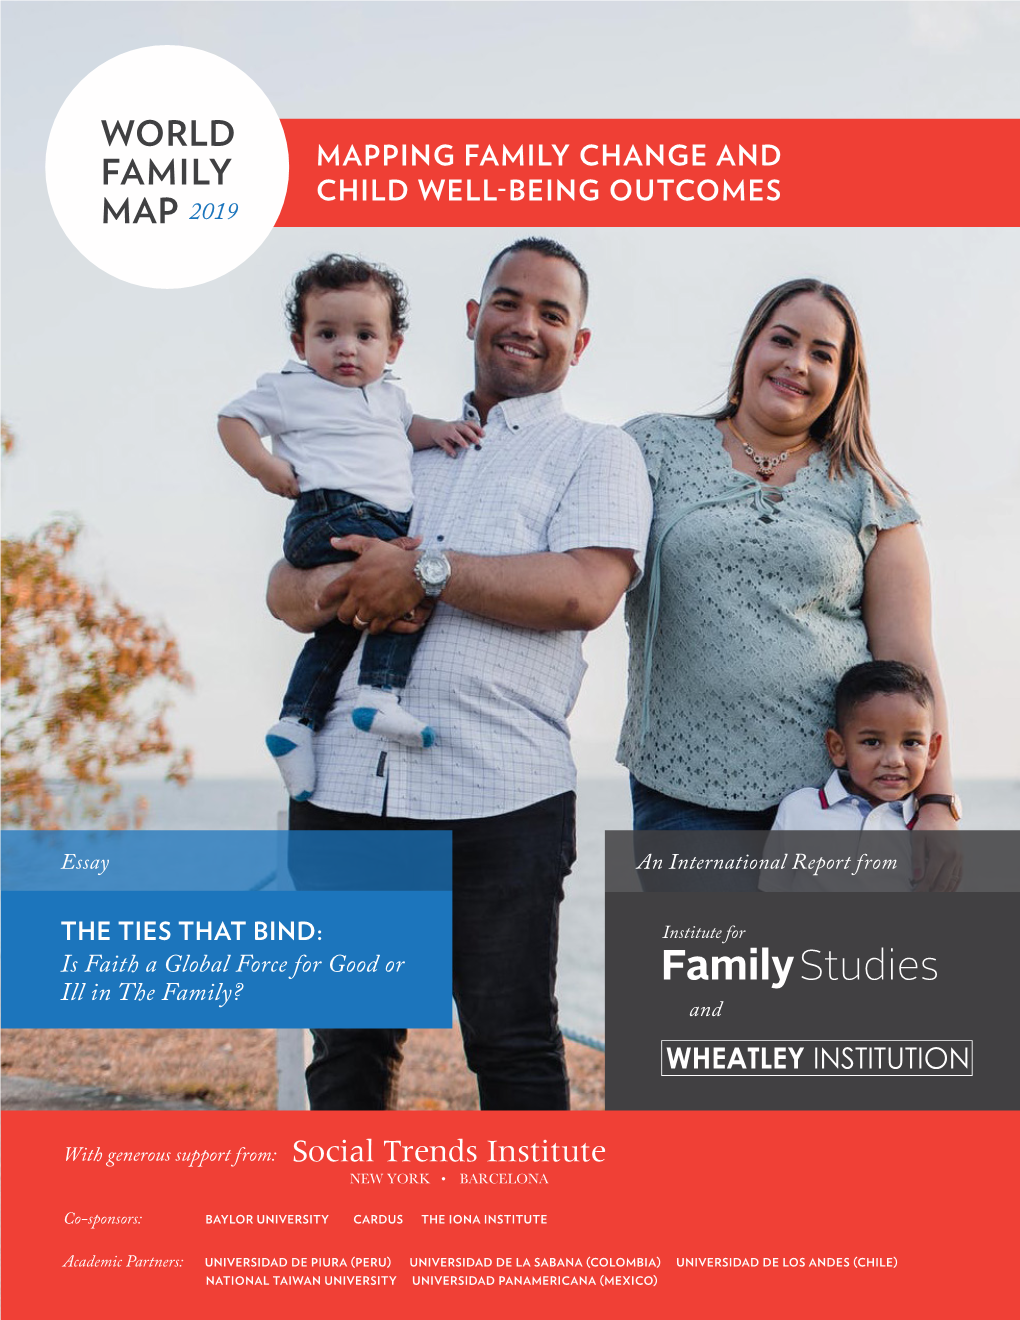 World Family Map 2019 Demonstrate the Diversity INDICATORS of Families and Nations in Which Children Are Being Raised